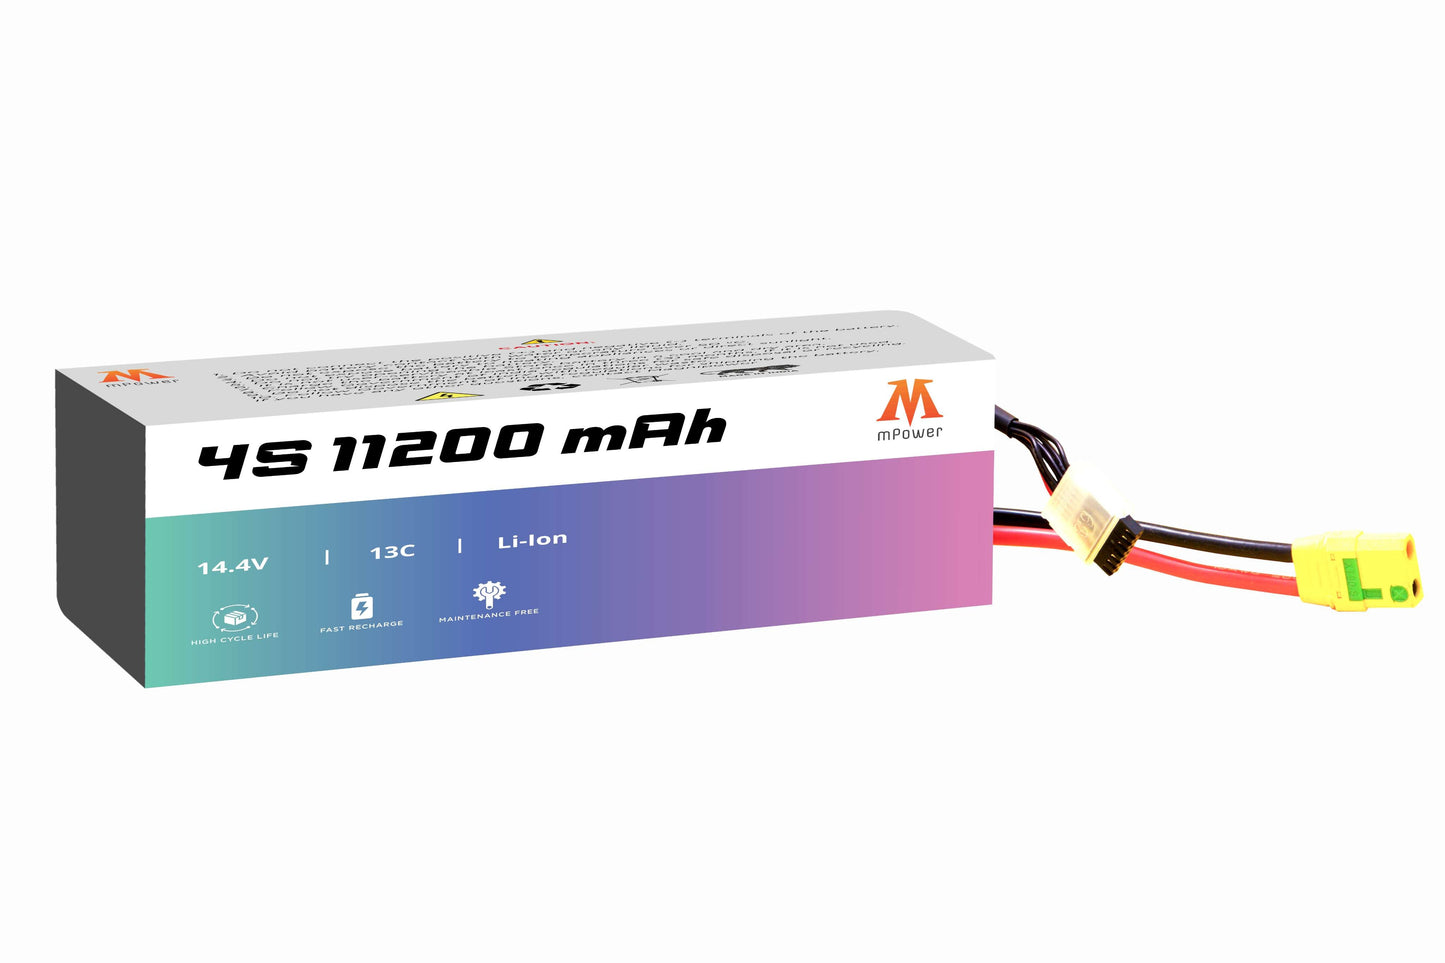 mPower 4S 11200mAh Lithium-Ion Battery for Surveillance Drones